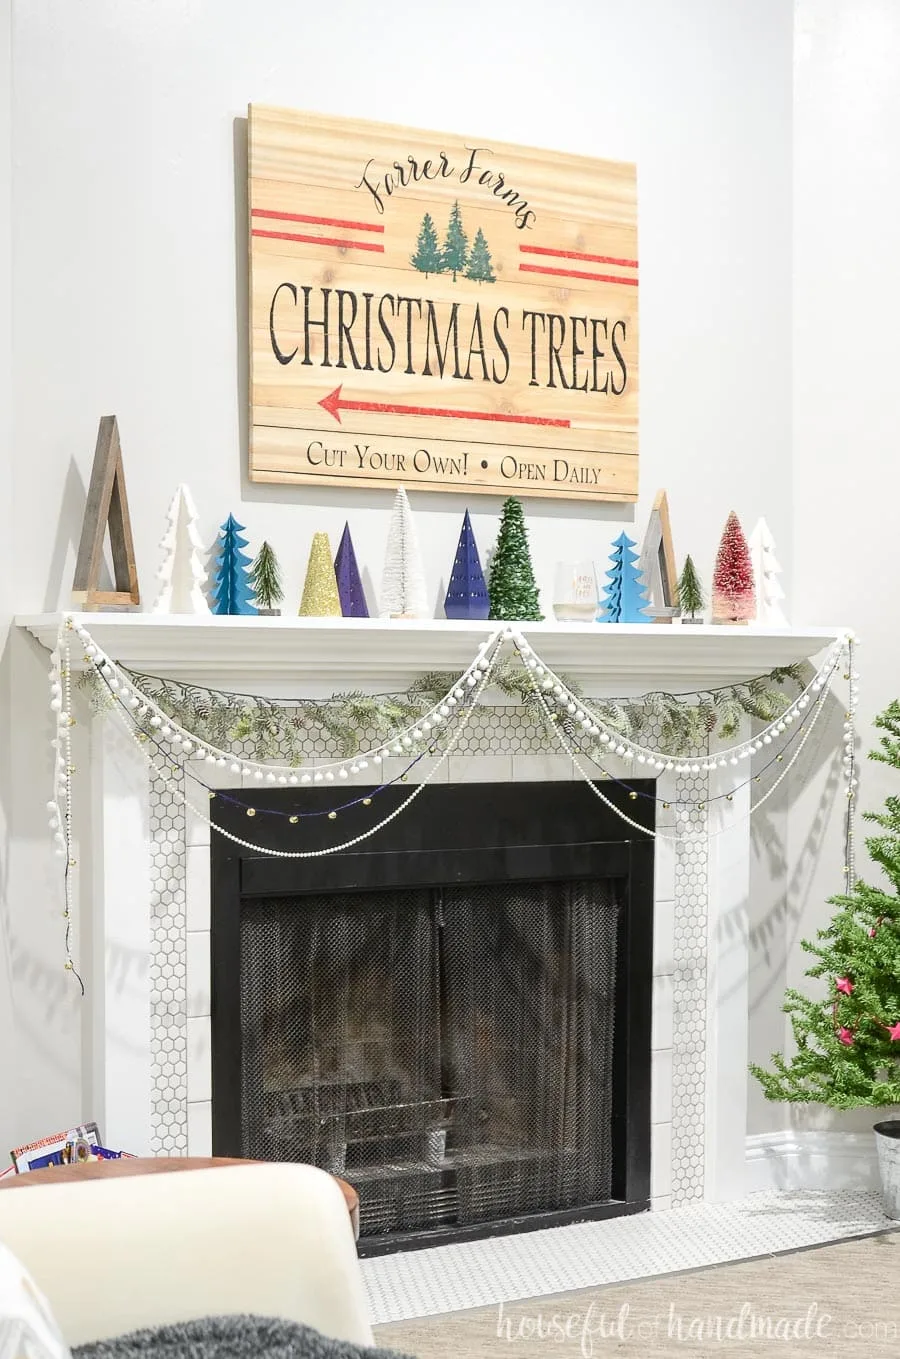 Christmas mantel decorated with reclaimed wood Christmas trees, porcelain Christmas trees and paper Christmas trees with a Christmas tree farm sign above it.